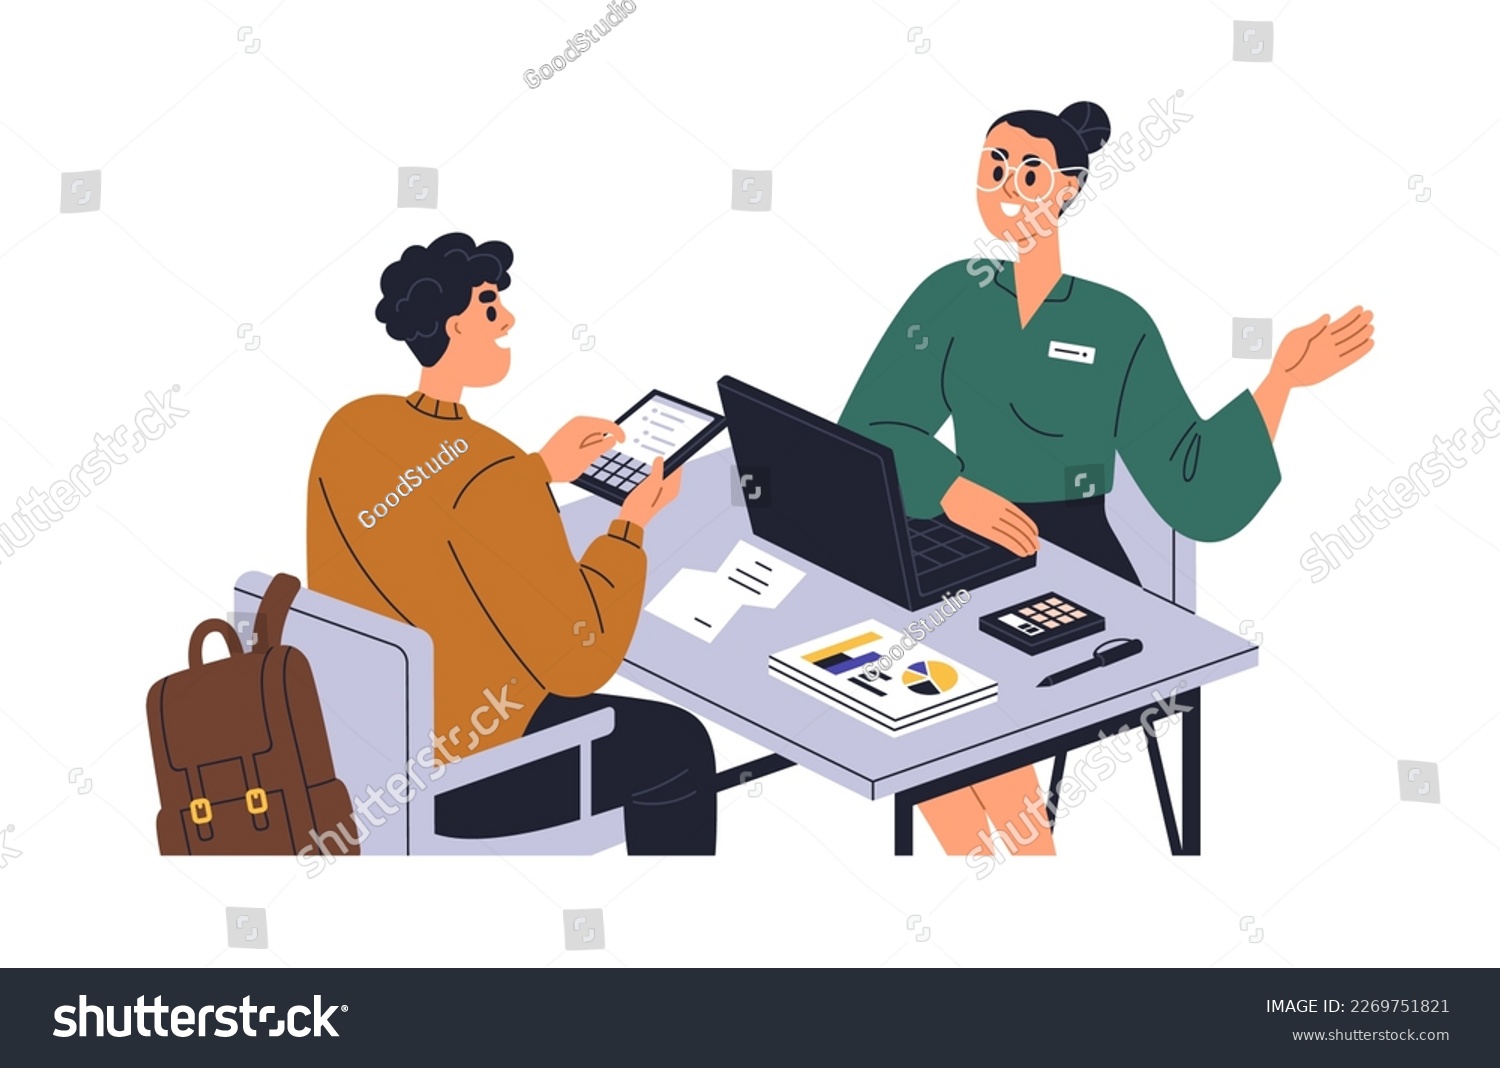 Financial advisor, bank consultant helping, consulting client on finance analysis, tax law. Adviser and person during consultation. Flat graphic vector illustration isolated on white background #2269751821